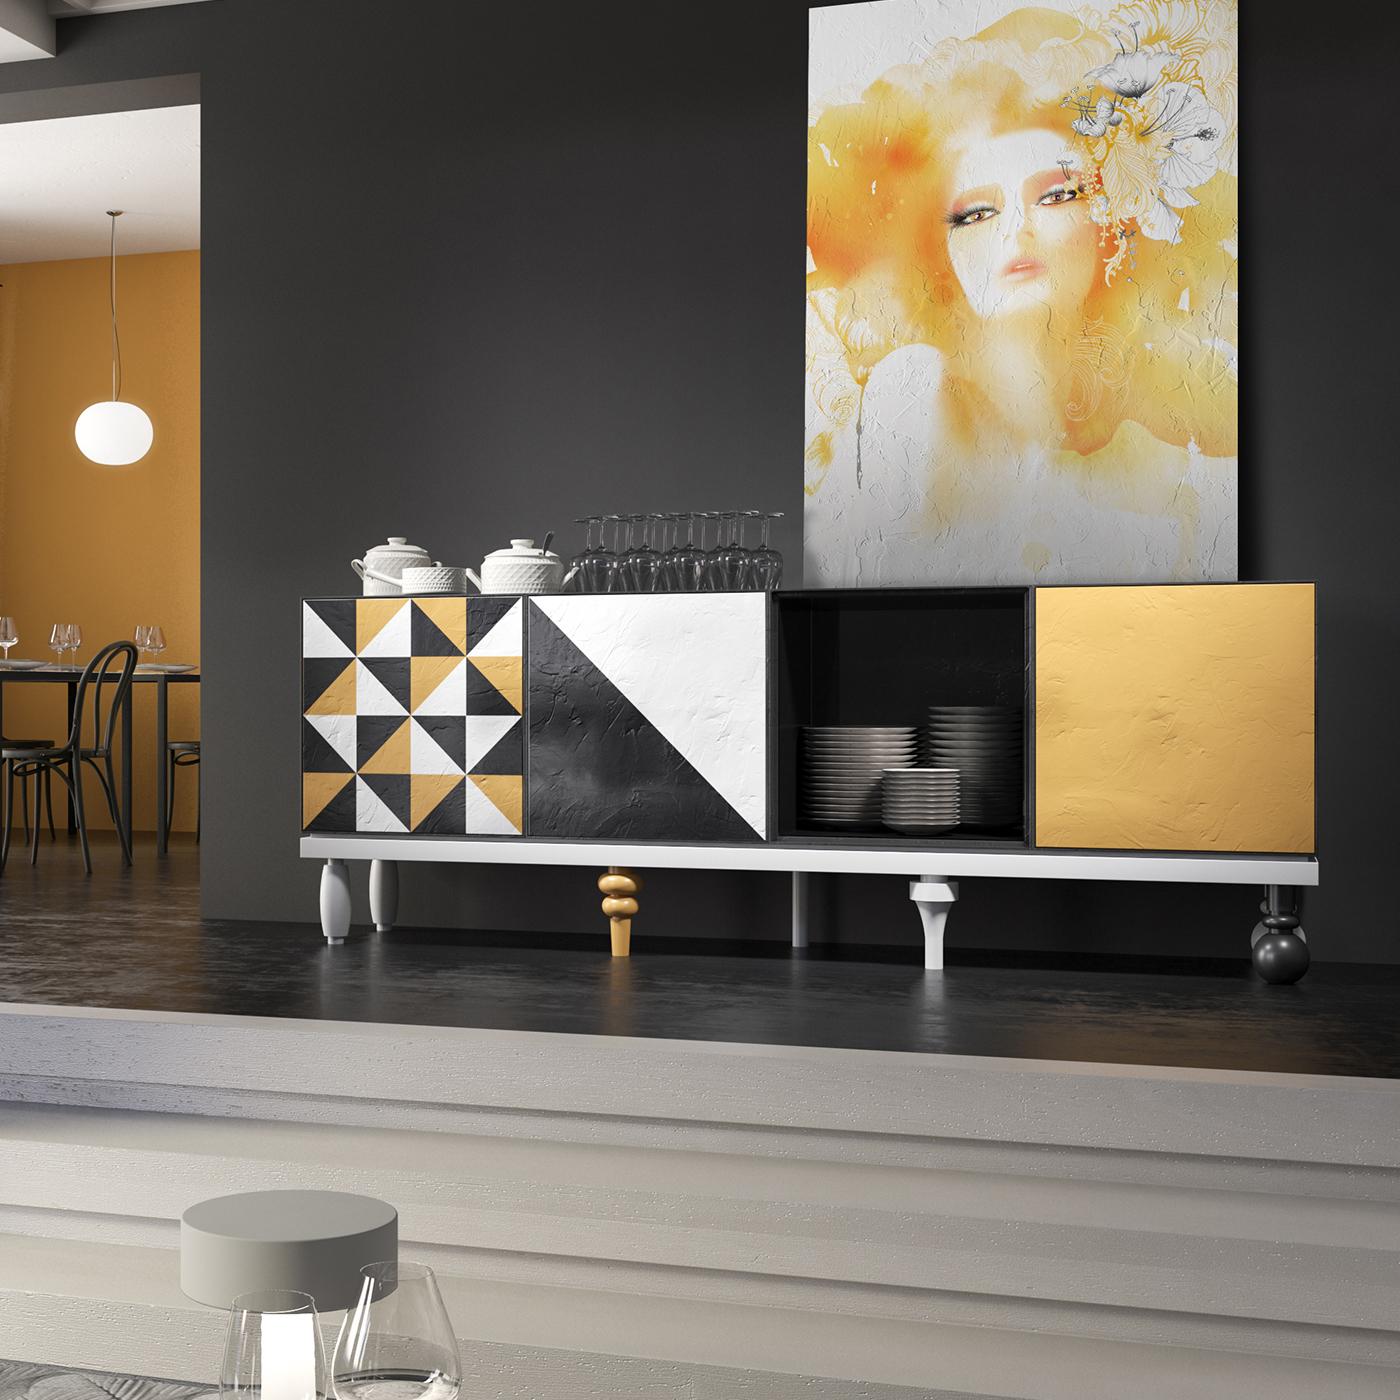 Striking and whimsical, this sideboard is an eye-catching addition to a modern interior, where it will equip a room with generous storage space, while also enriching it with geometric decorative patterns in ochre, black, and white. This piece is